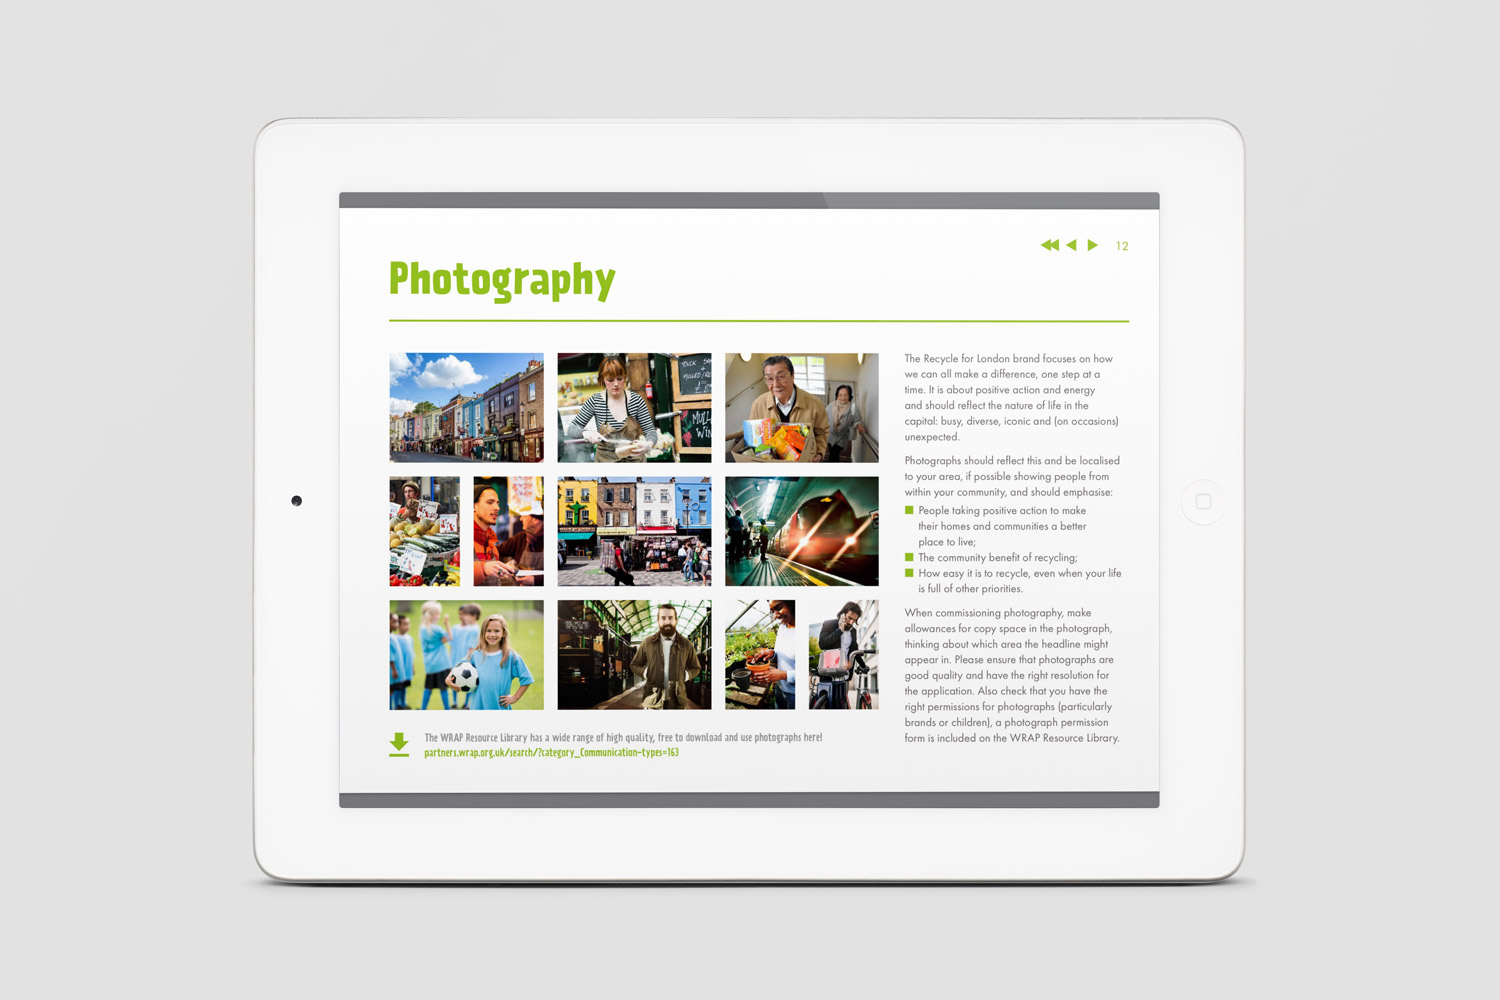 Recycle-for-London-Brand-Guidelines-photography-iPad-leaflet-by-Get-it-Sorted.jpg